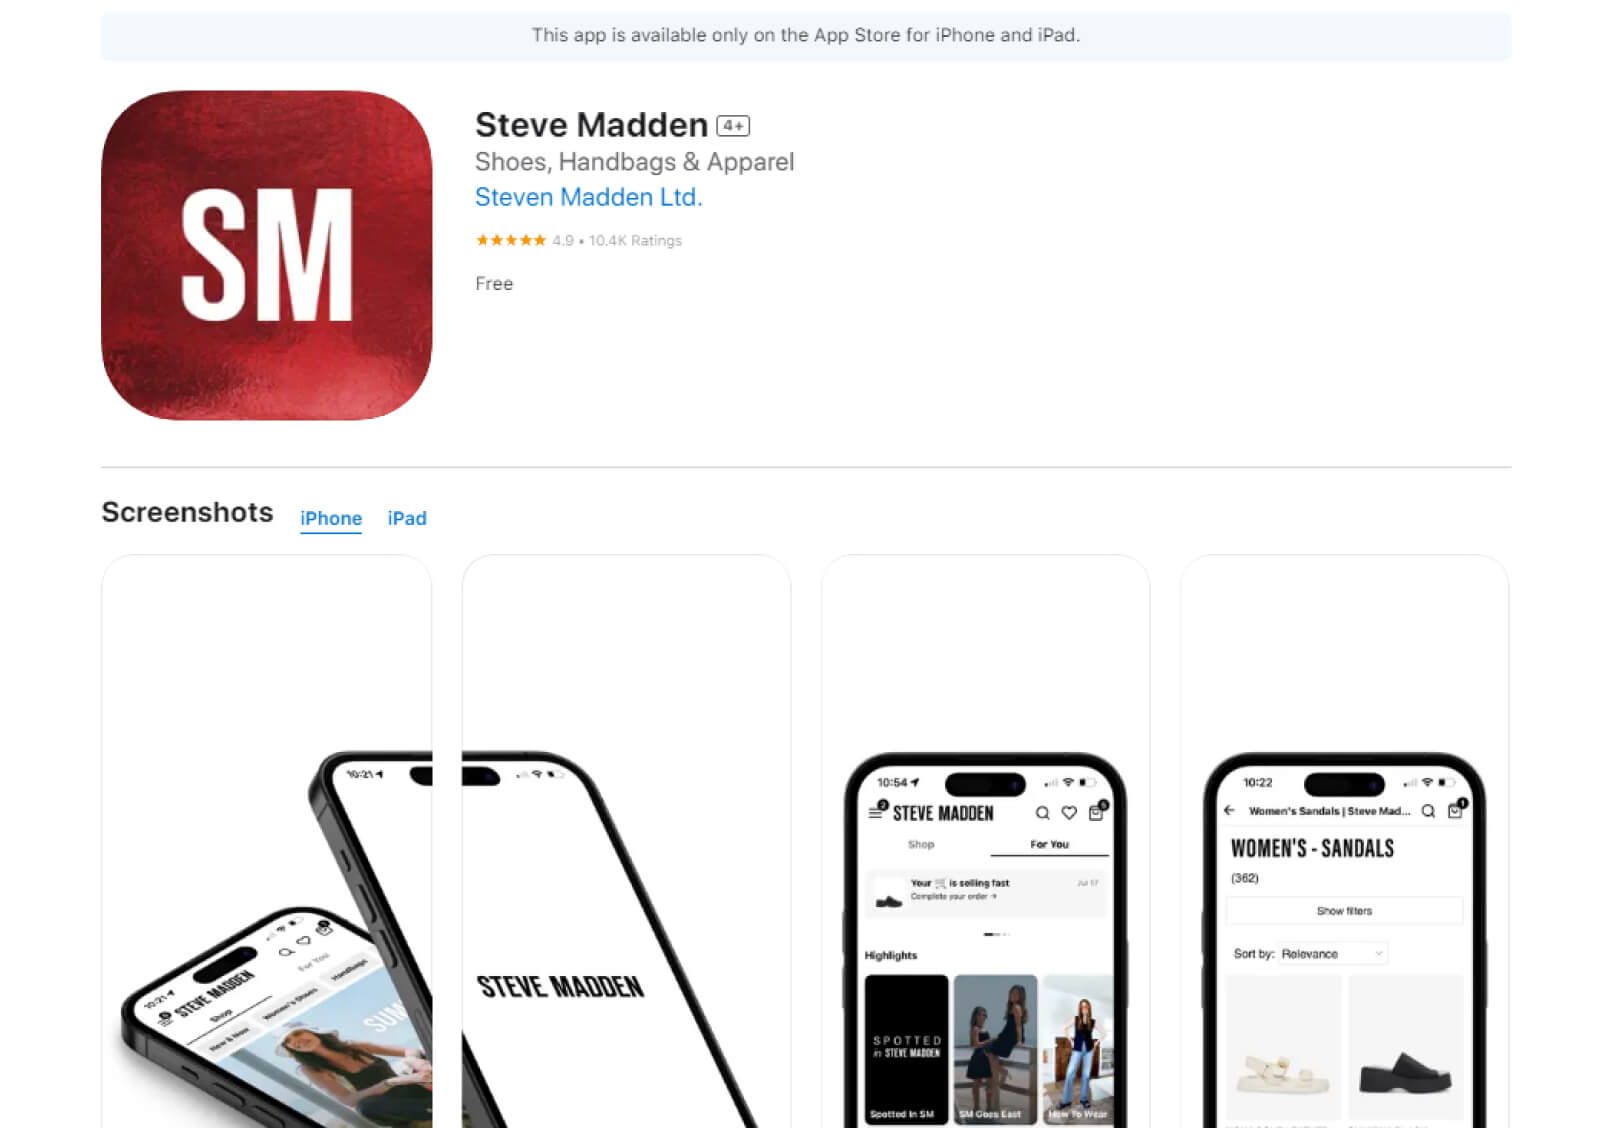 Steve Madden app icon and interface showcasing personalized shopping experience for enhanced customer engagement as part of the latest ecommerce trends